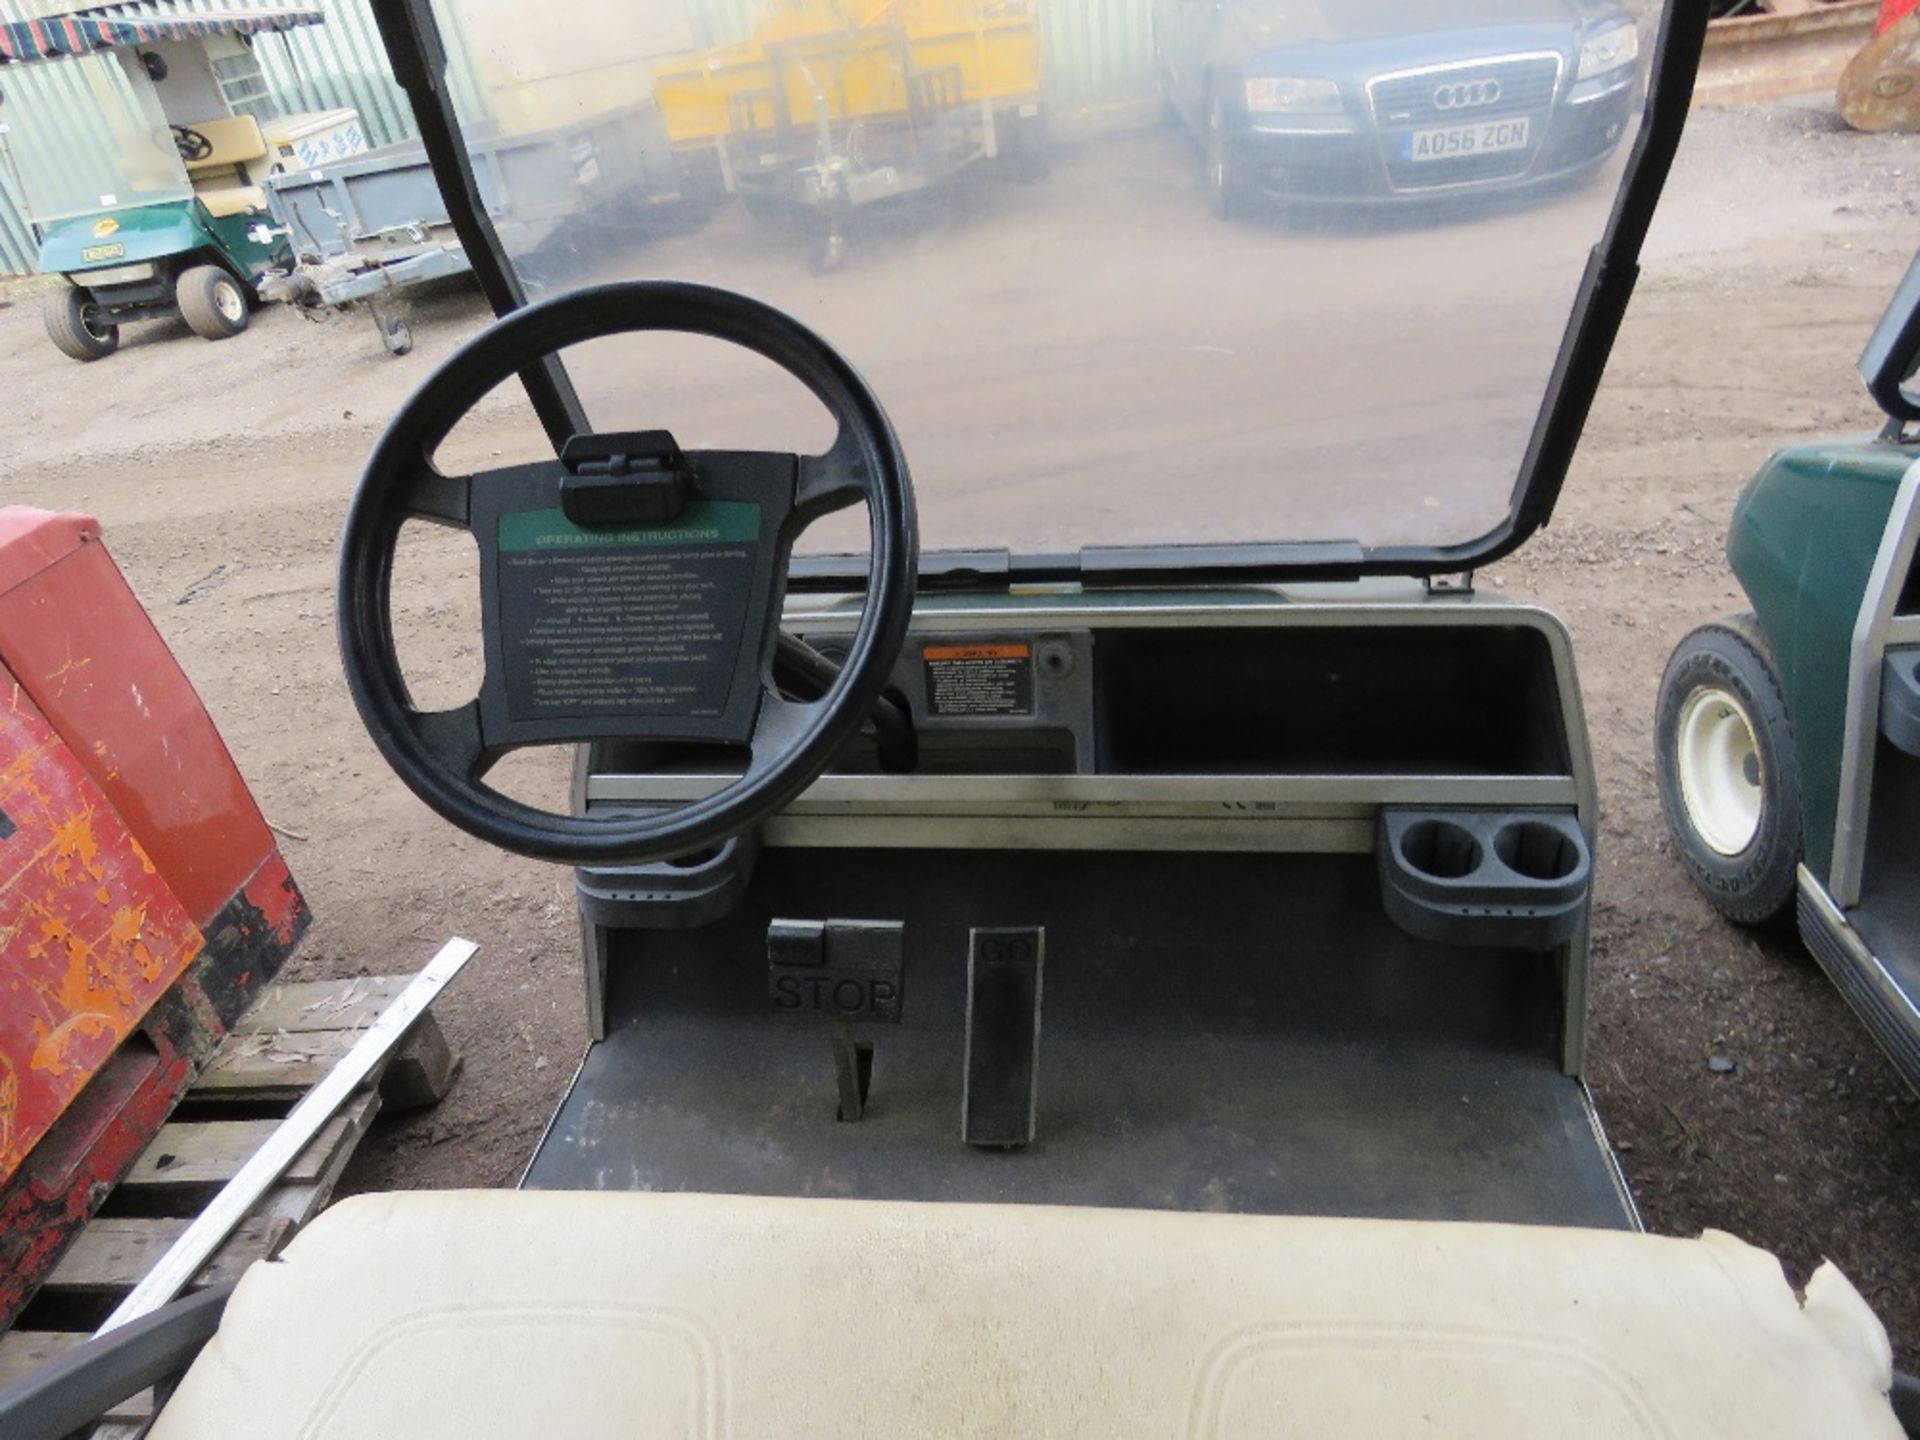 CLUBCAR PETROL ENGINED GOLF CART. BEEN STORED FOR SOME TIME, UNTESTED. - Image 6 of 8